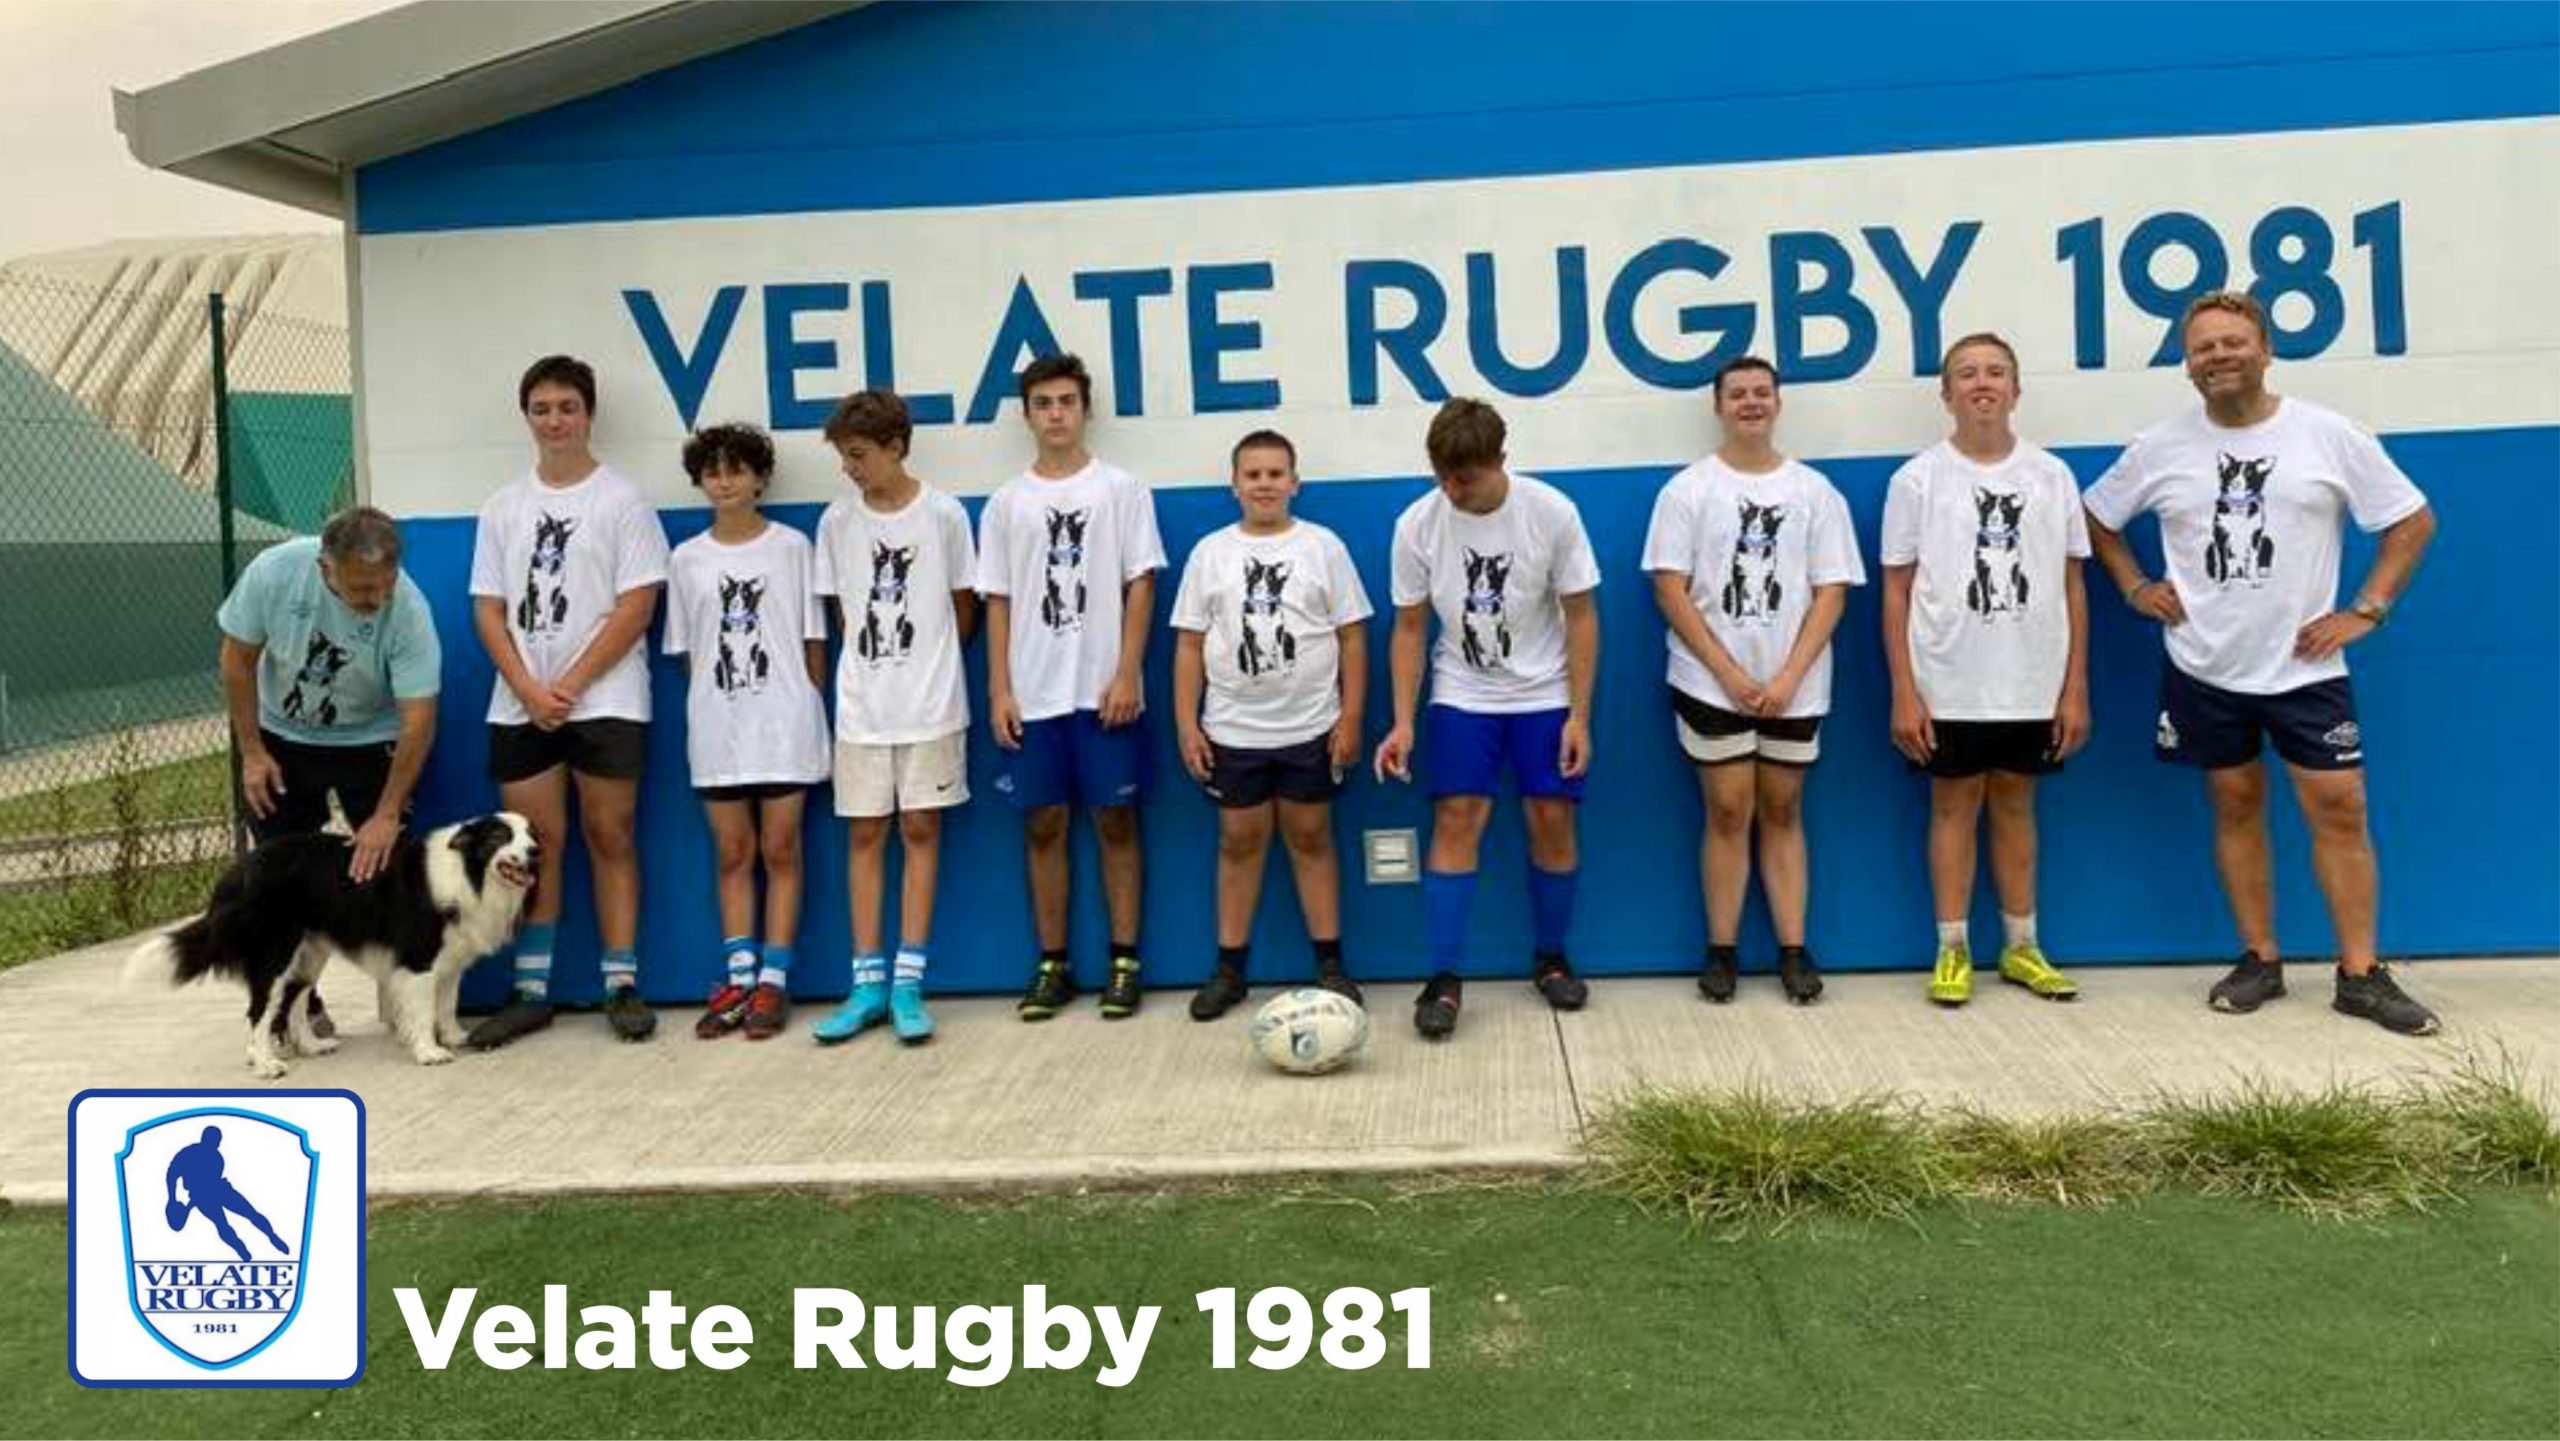 Velate Rugby